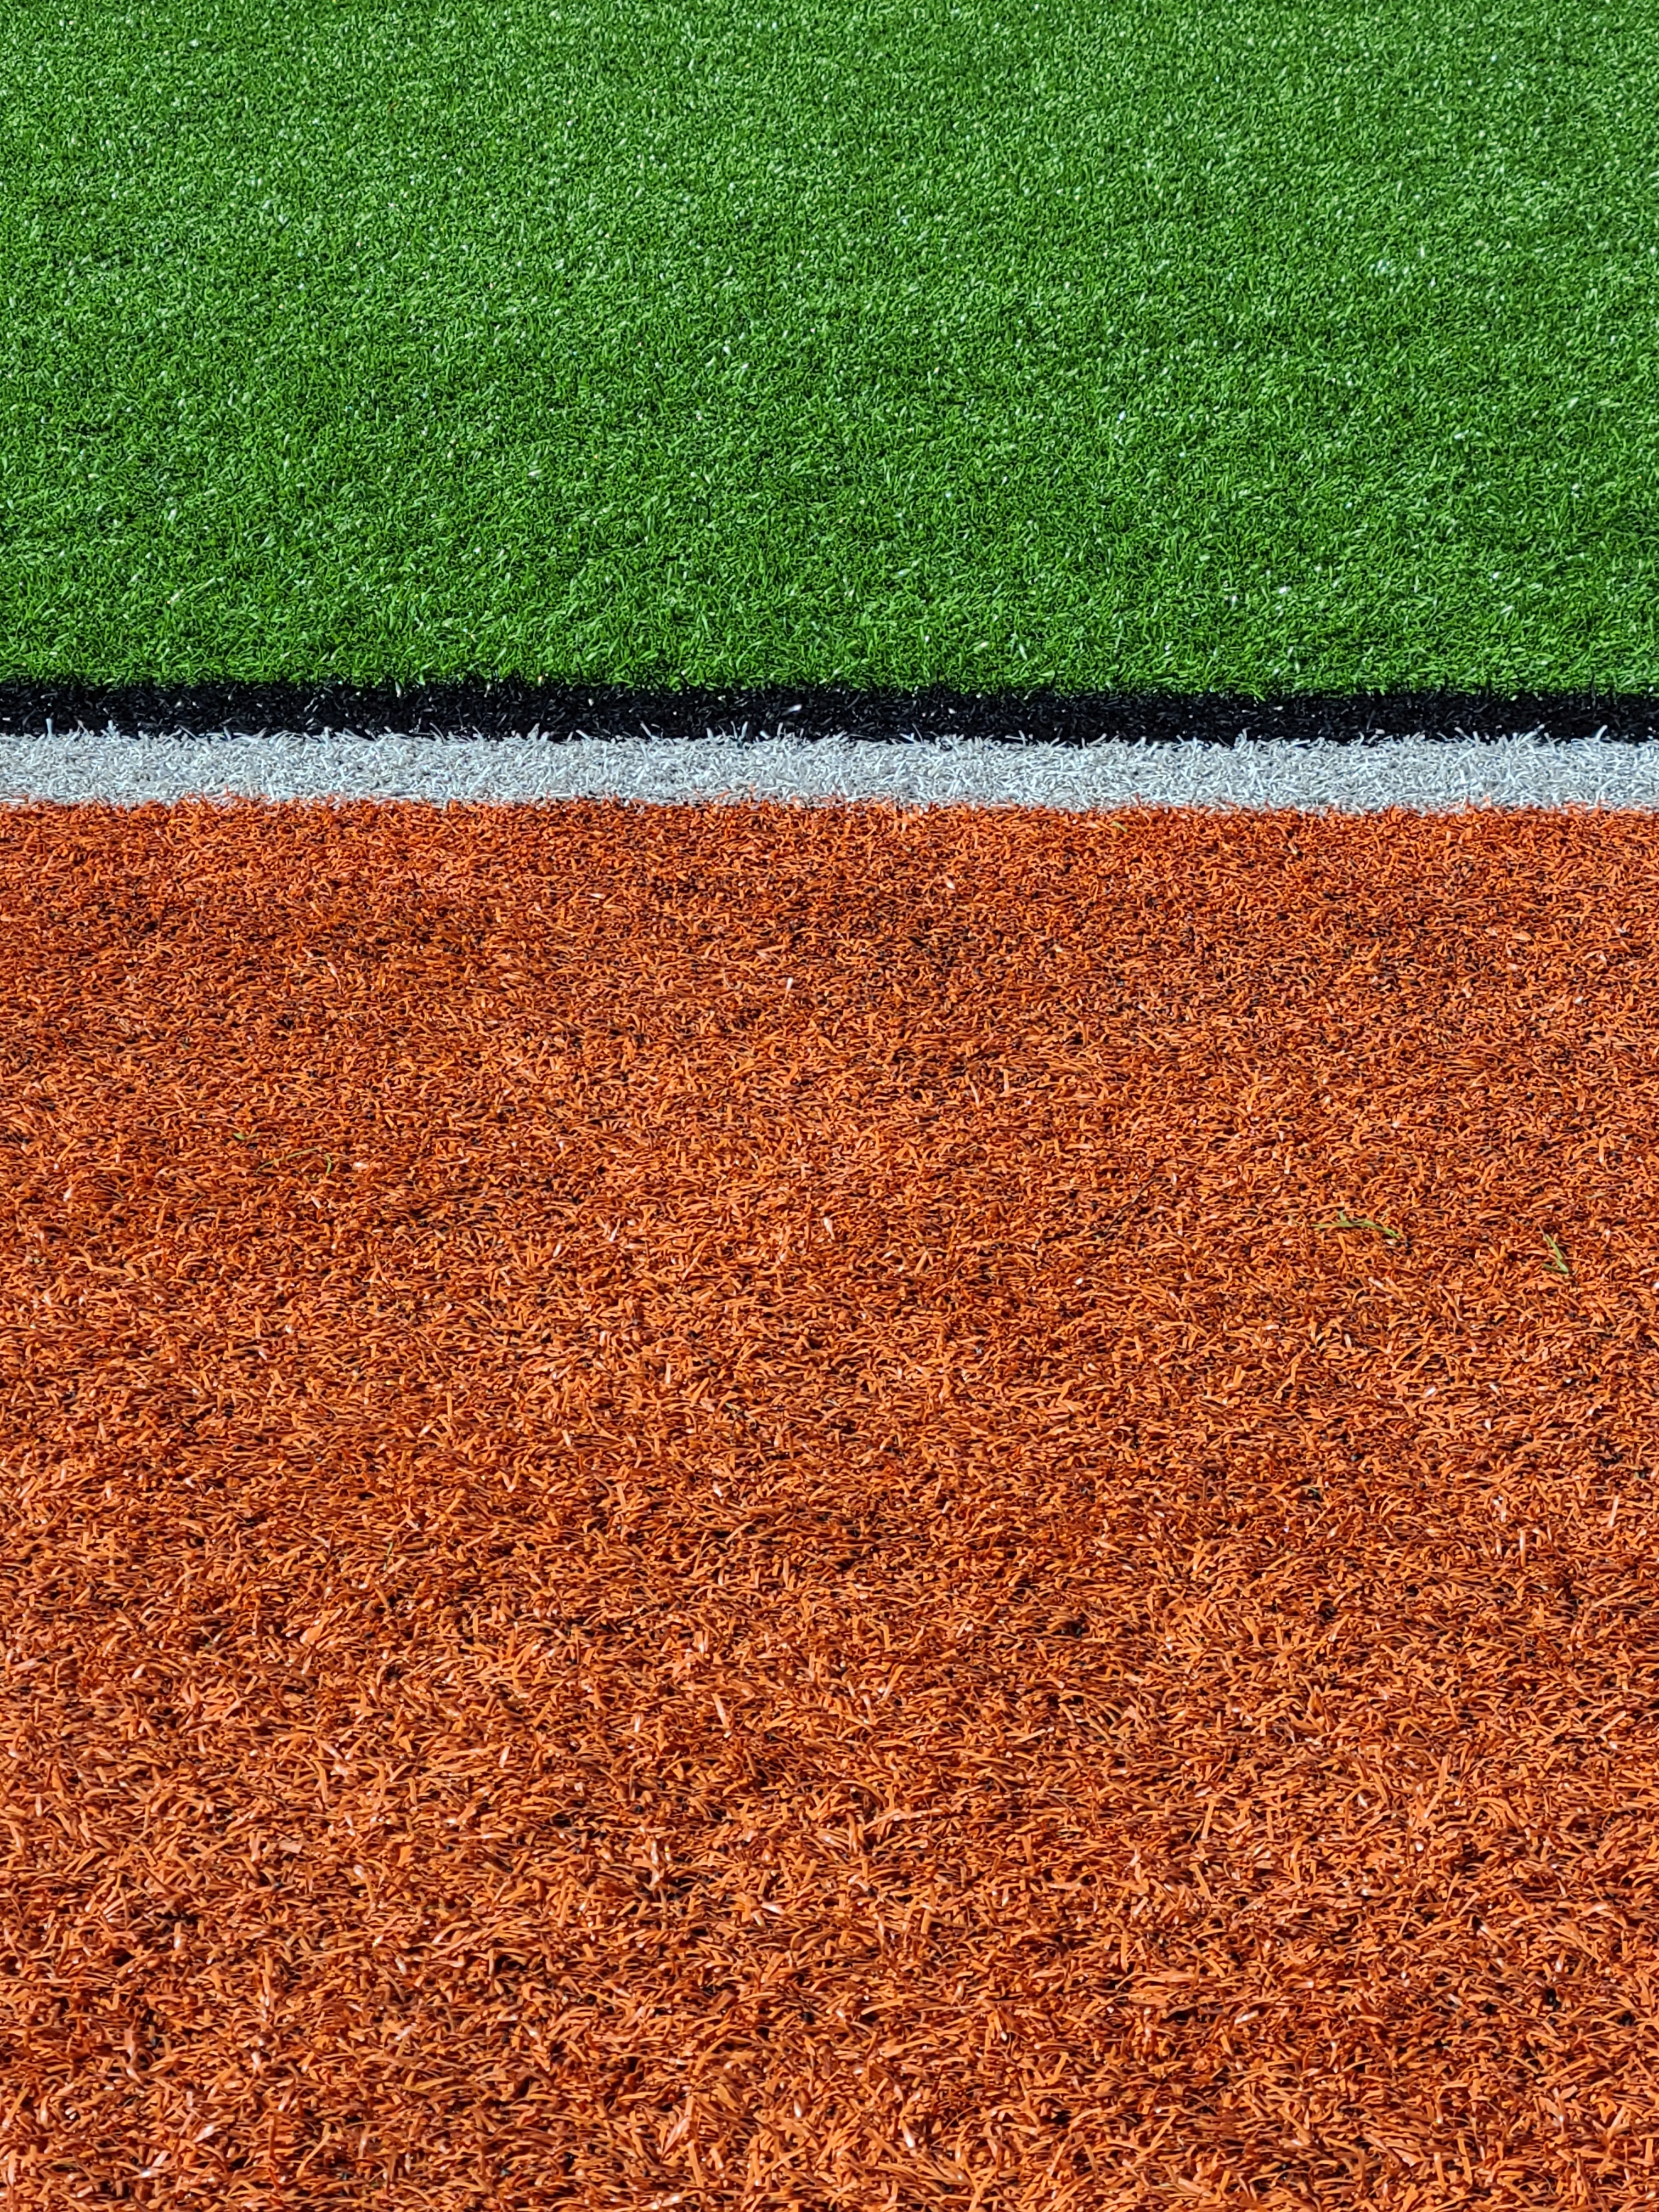 Ultra HD 4K grass, textures, coating, covering